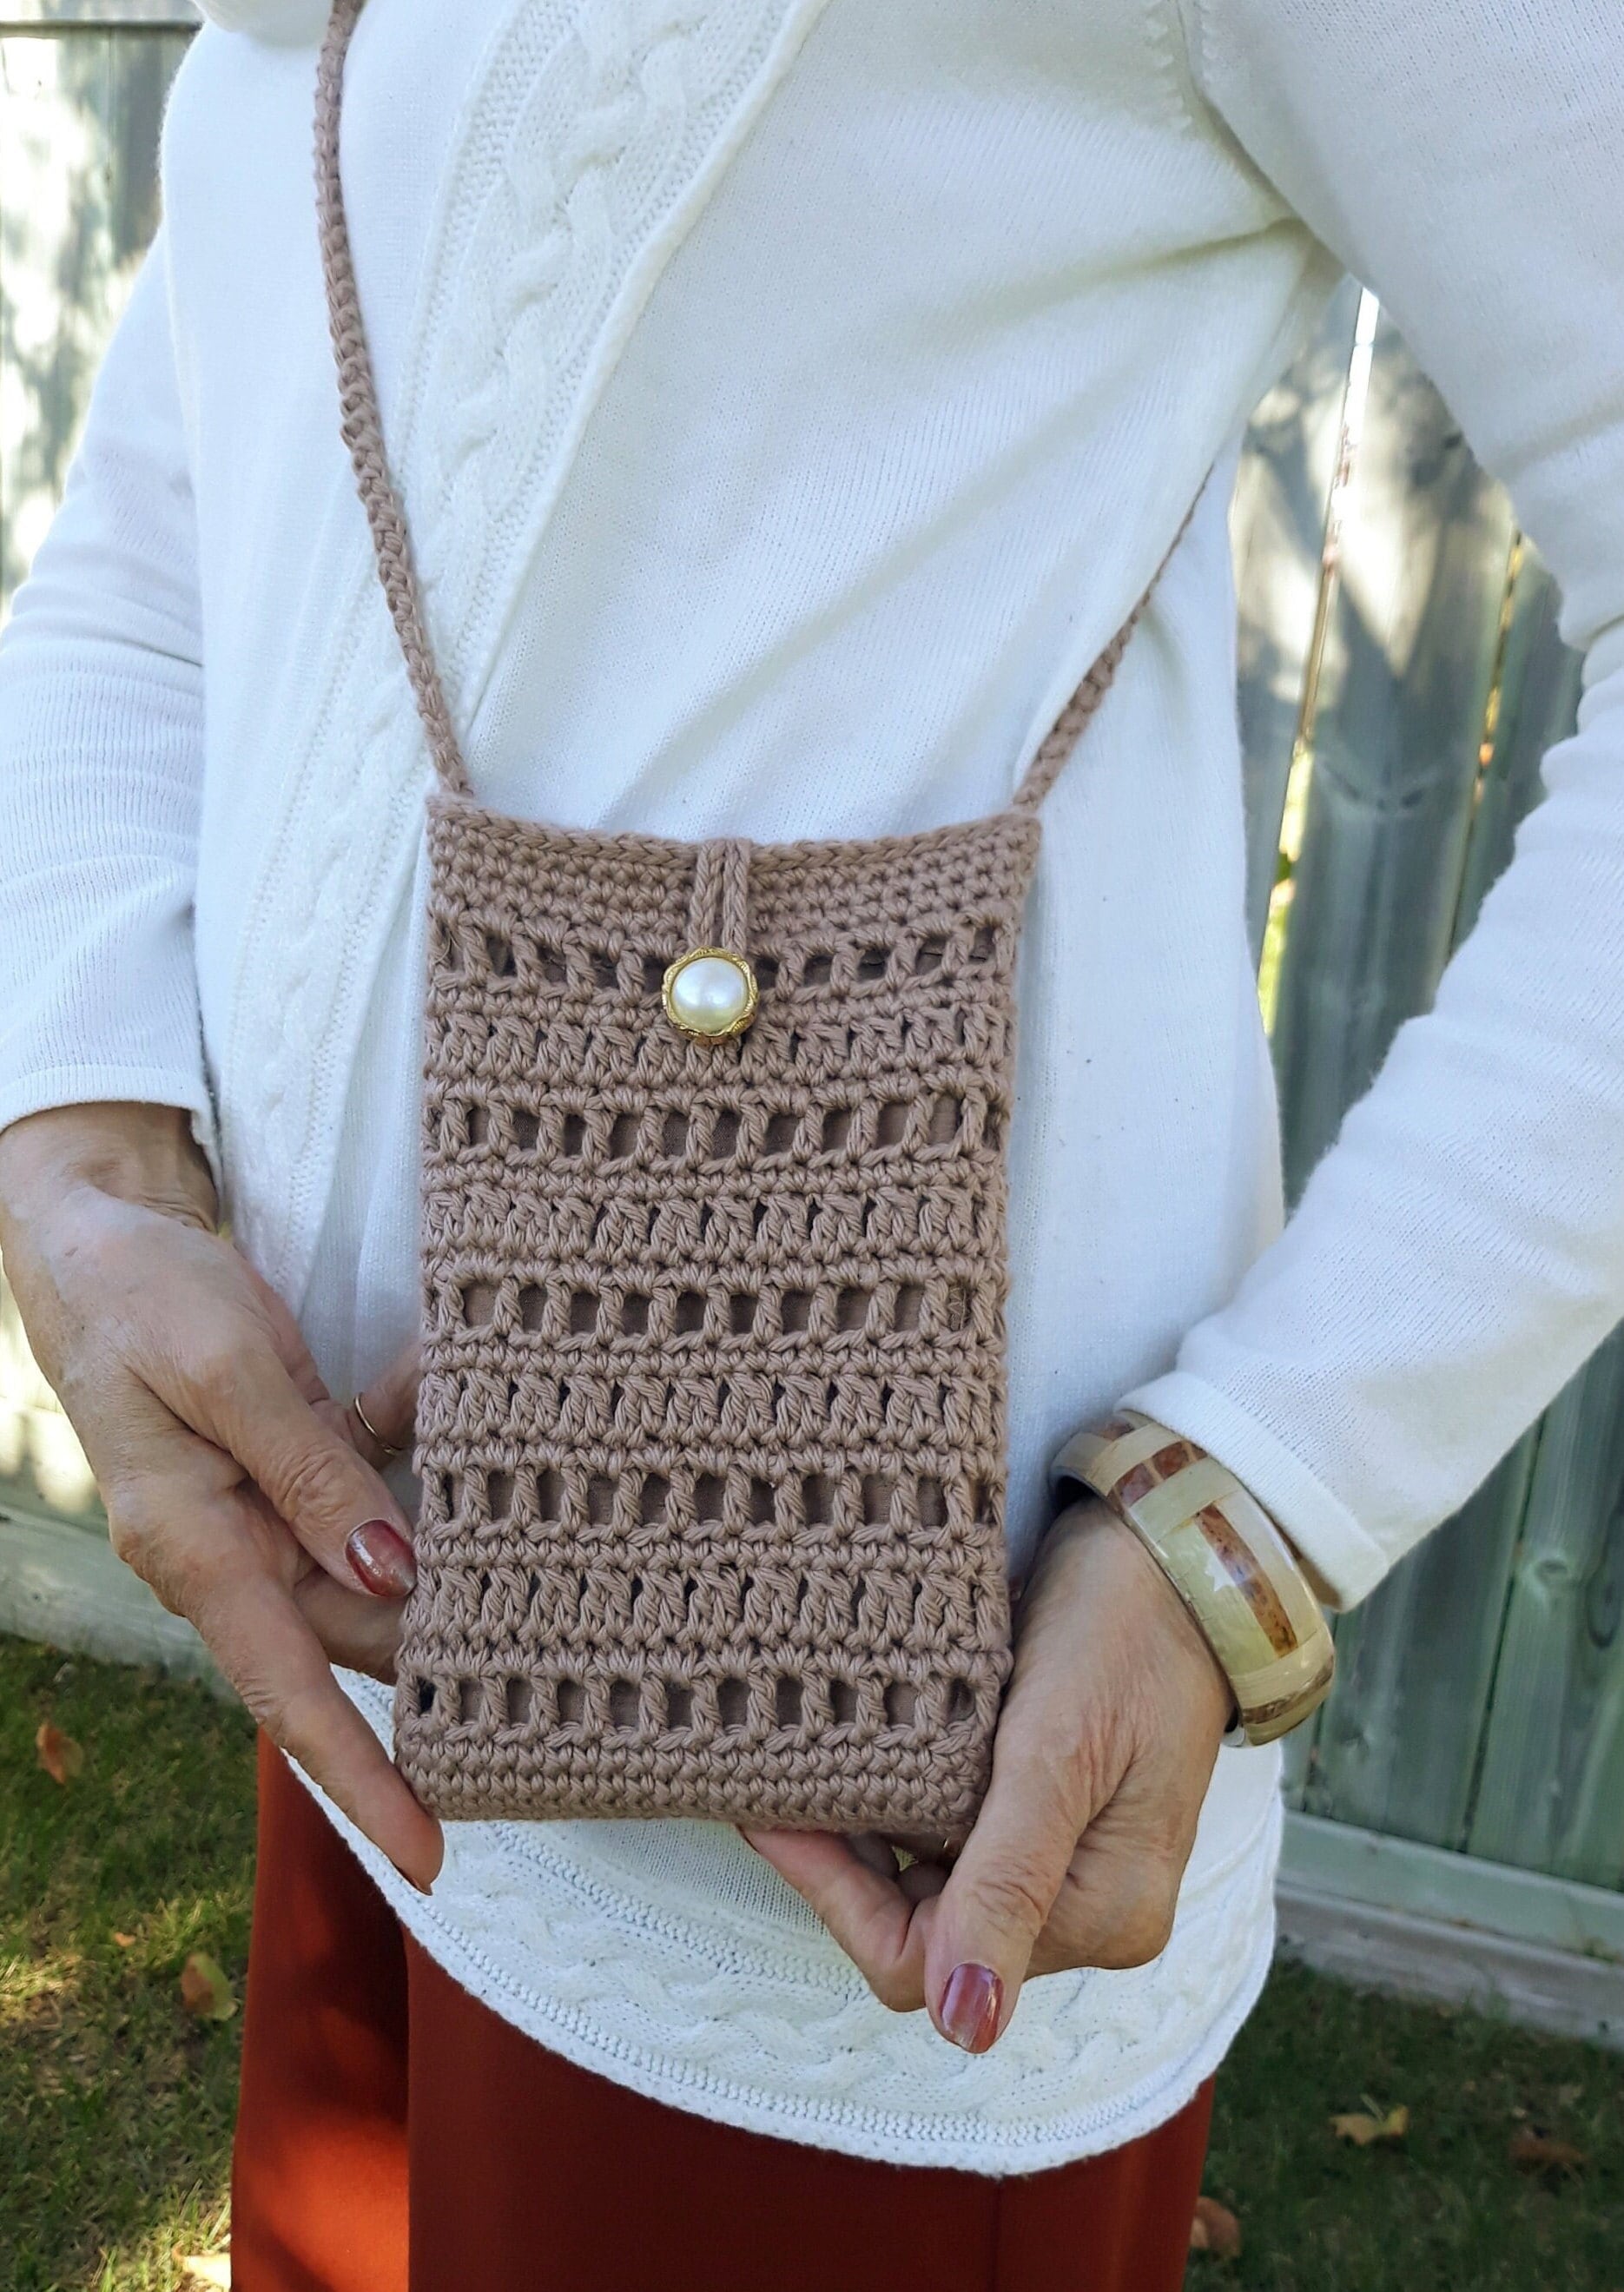 Celly Bags: Handbags Made Just to Fit Your Cell Phone